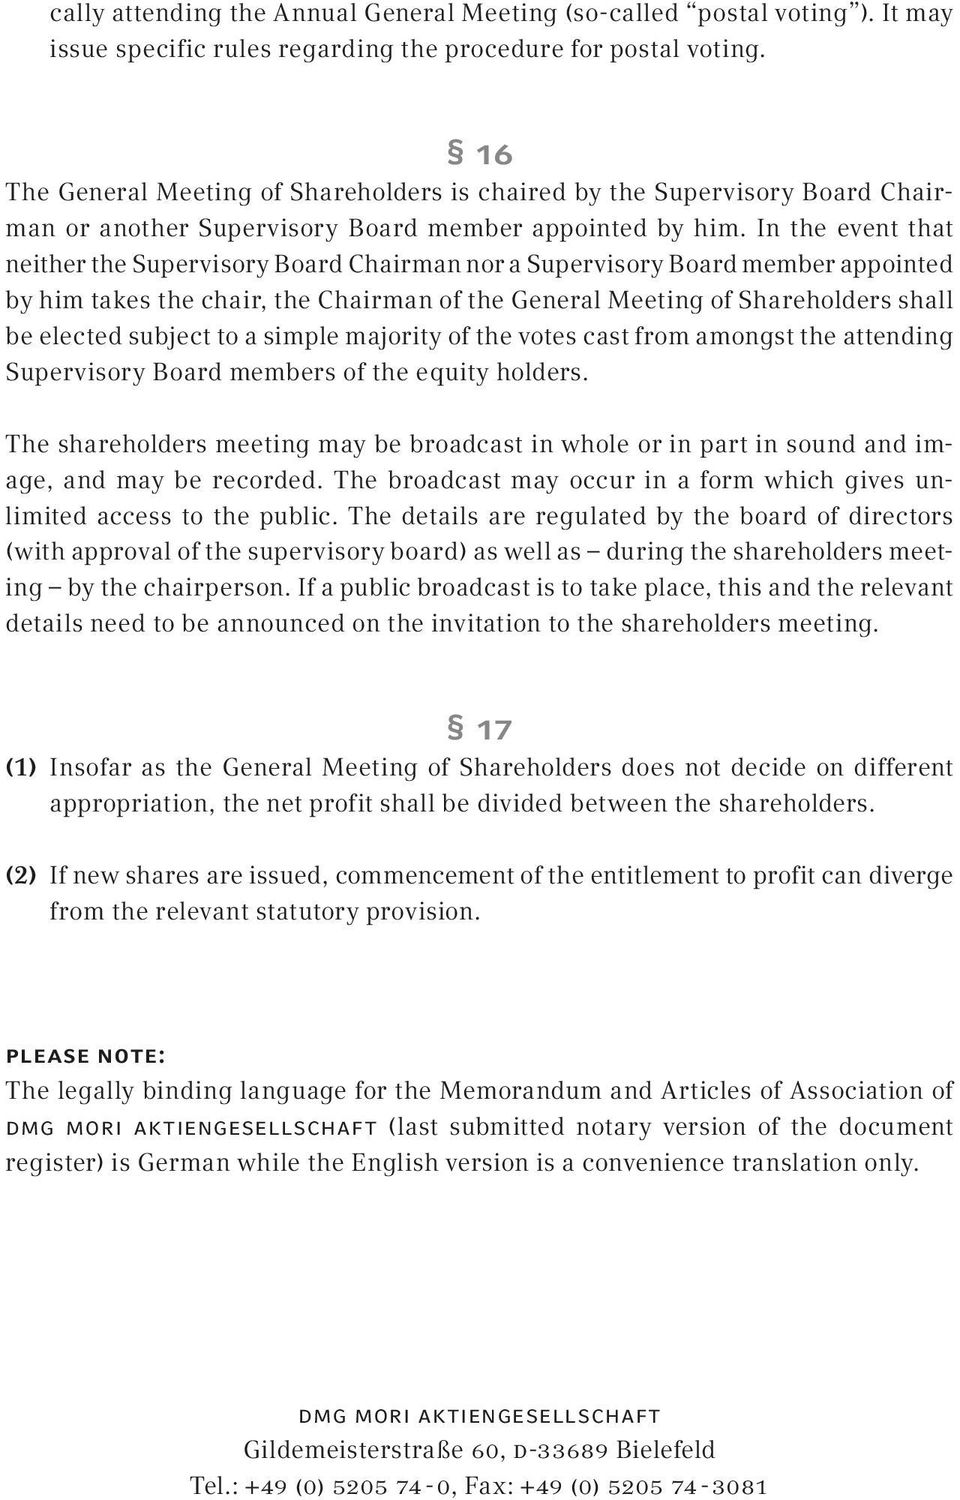 In the event that neither the Supervisory Board Chairman nor a Supervisory Board member appointed by him takes the chair, the Chairman of the General Meeting of Shareholders shall be elected subject